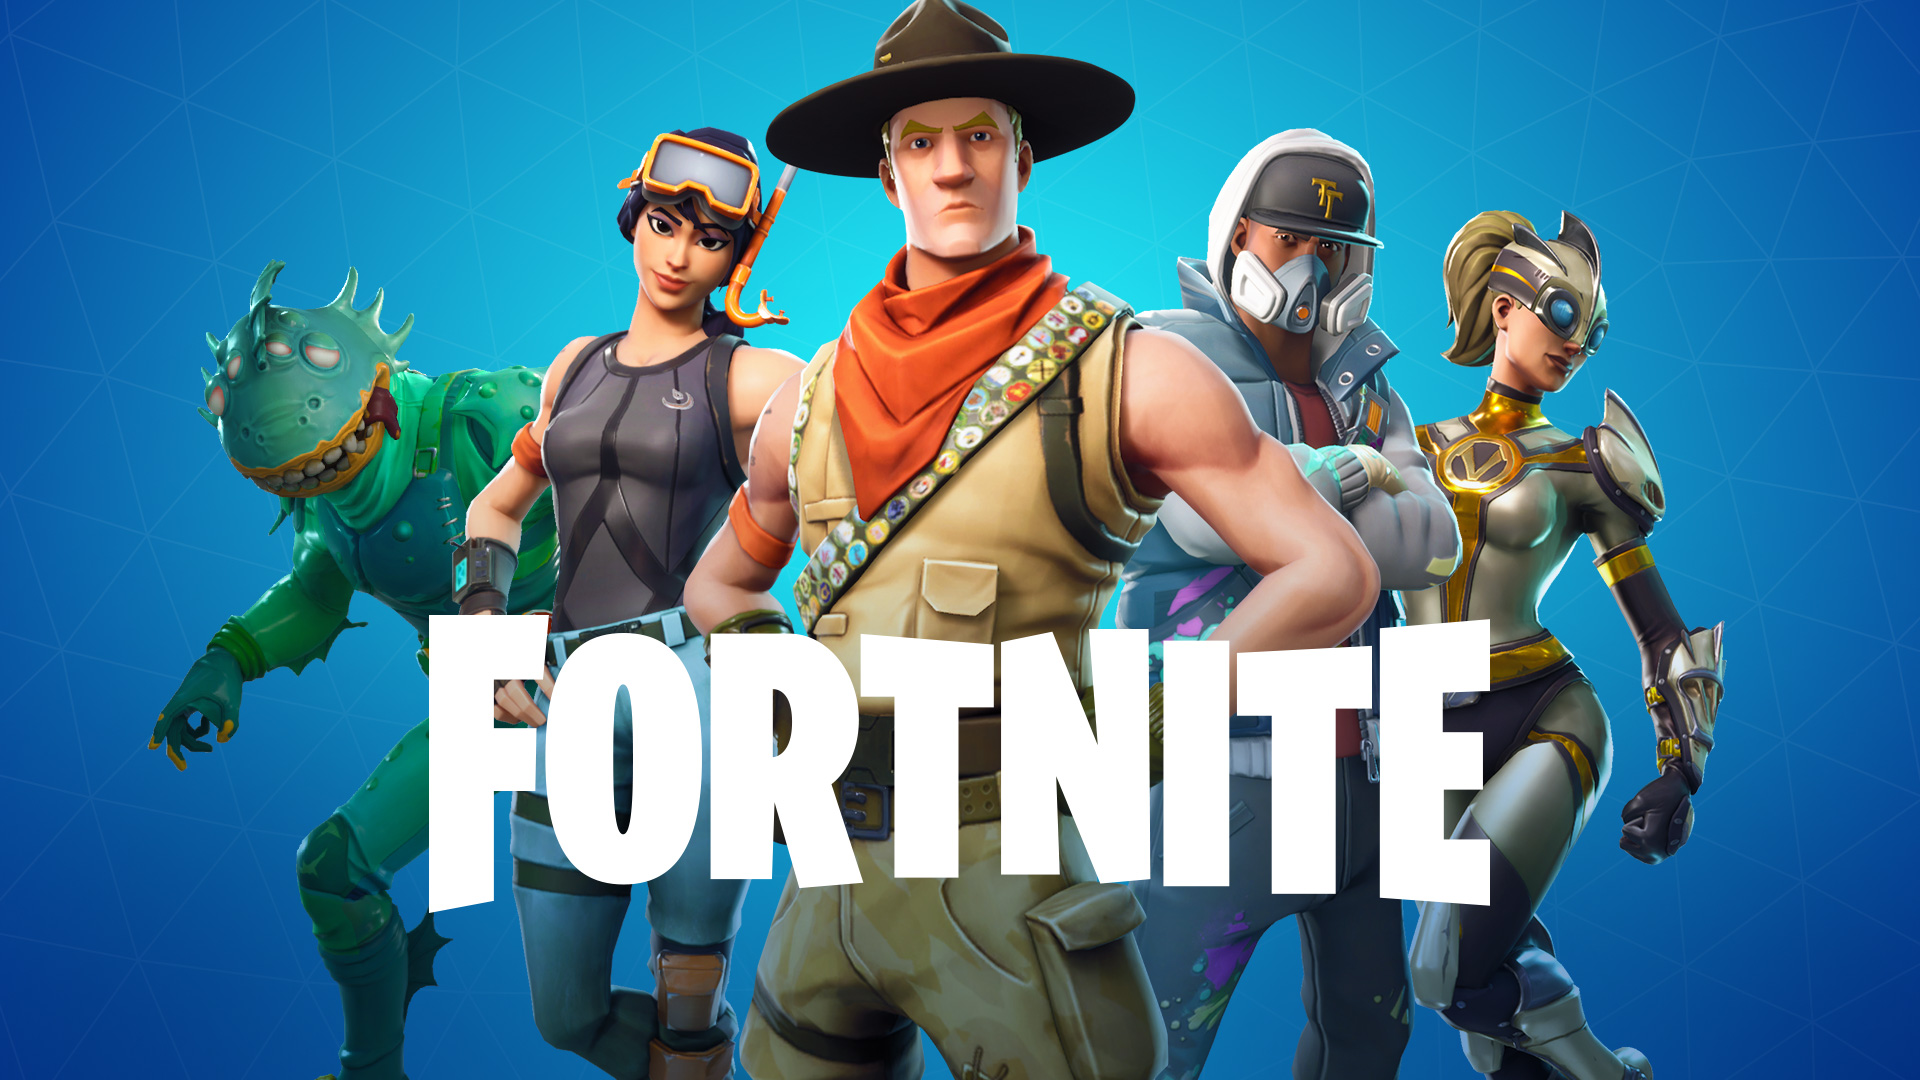 Fortnite Servers Suffering Issues While Save The Taken Offline Due To A